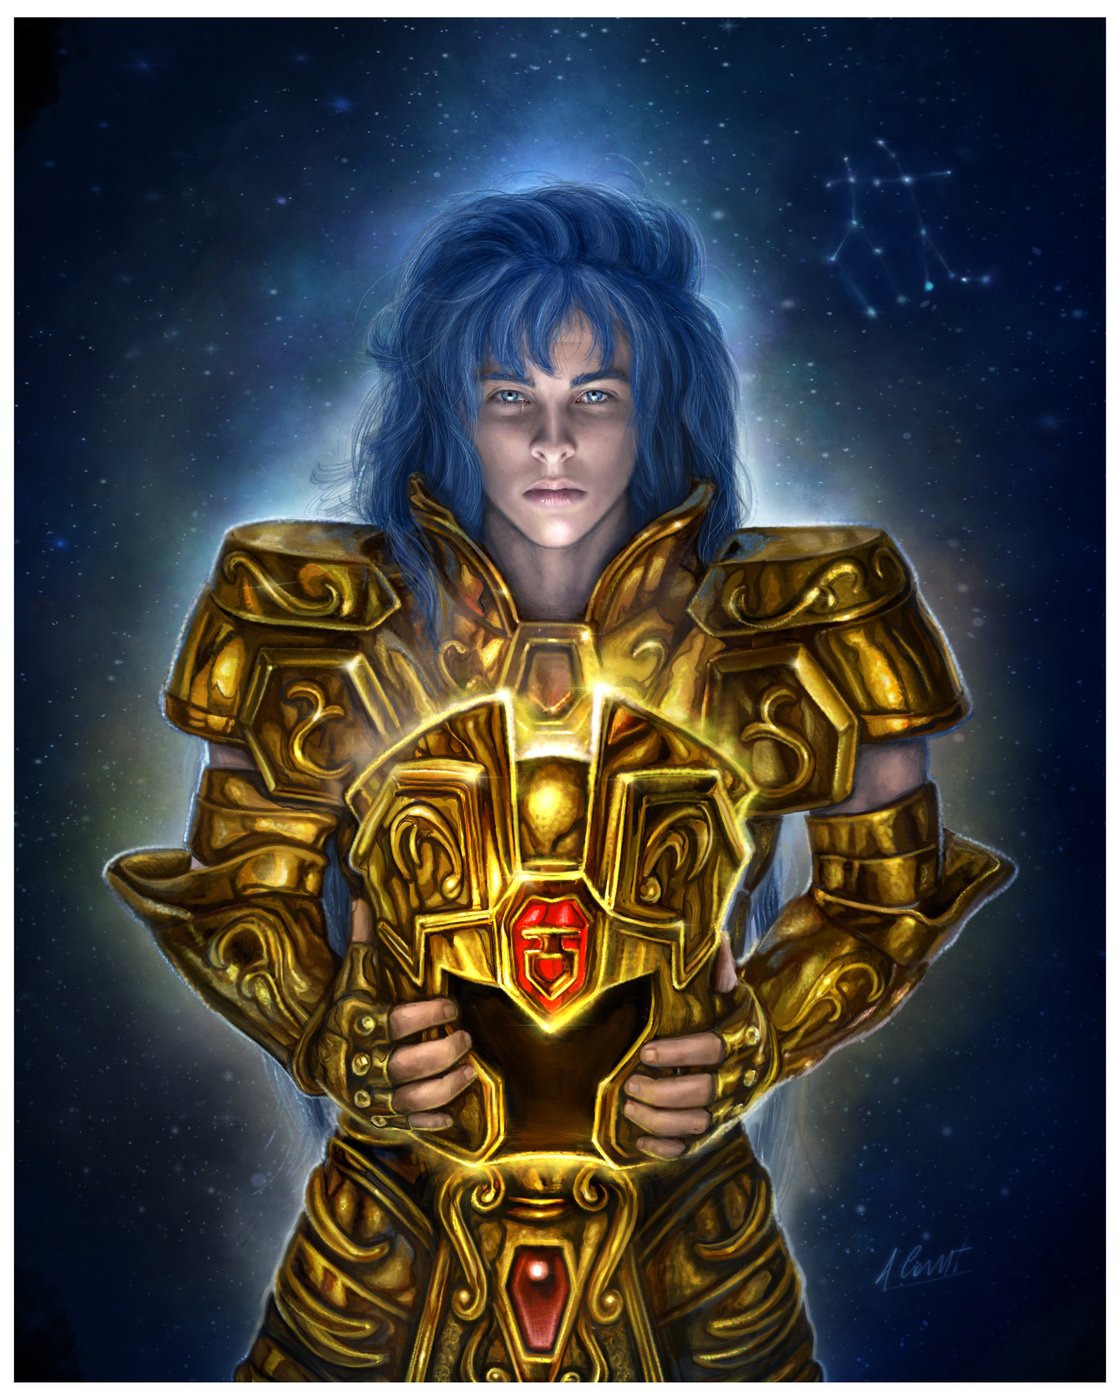 Image of Gemini SAGA "the  redemption" limited of 10 prints on fine art canvas